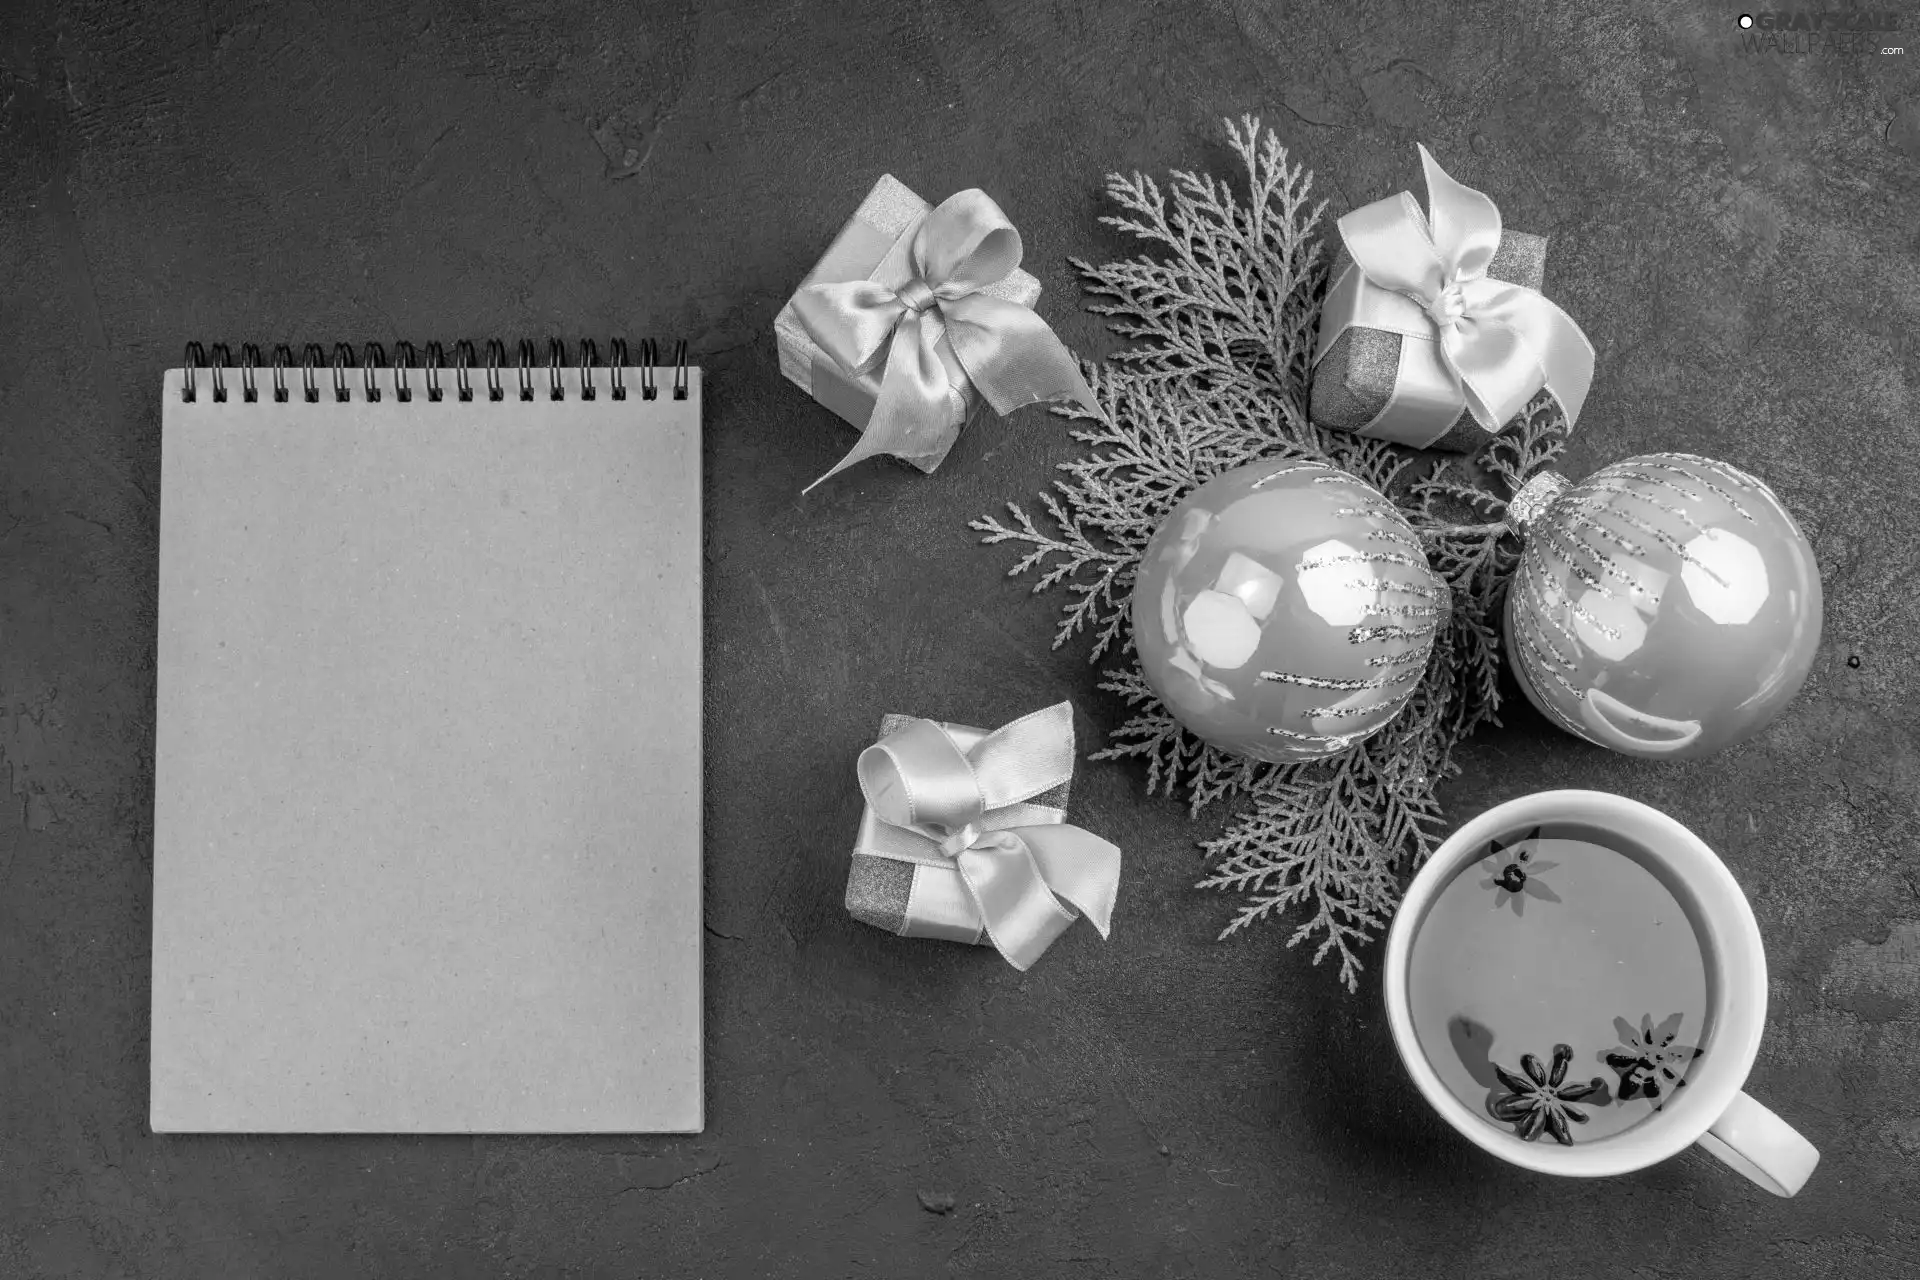 anise, note-book, Christmas, Twigs, gifts, tea, cup, baubles